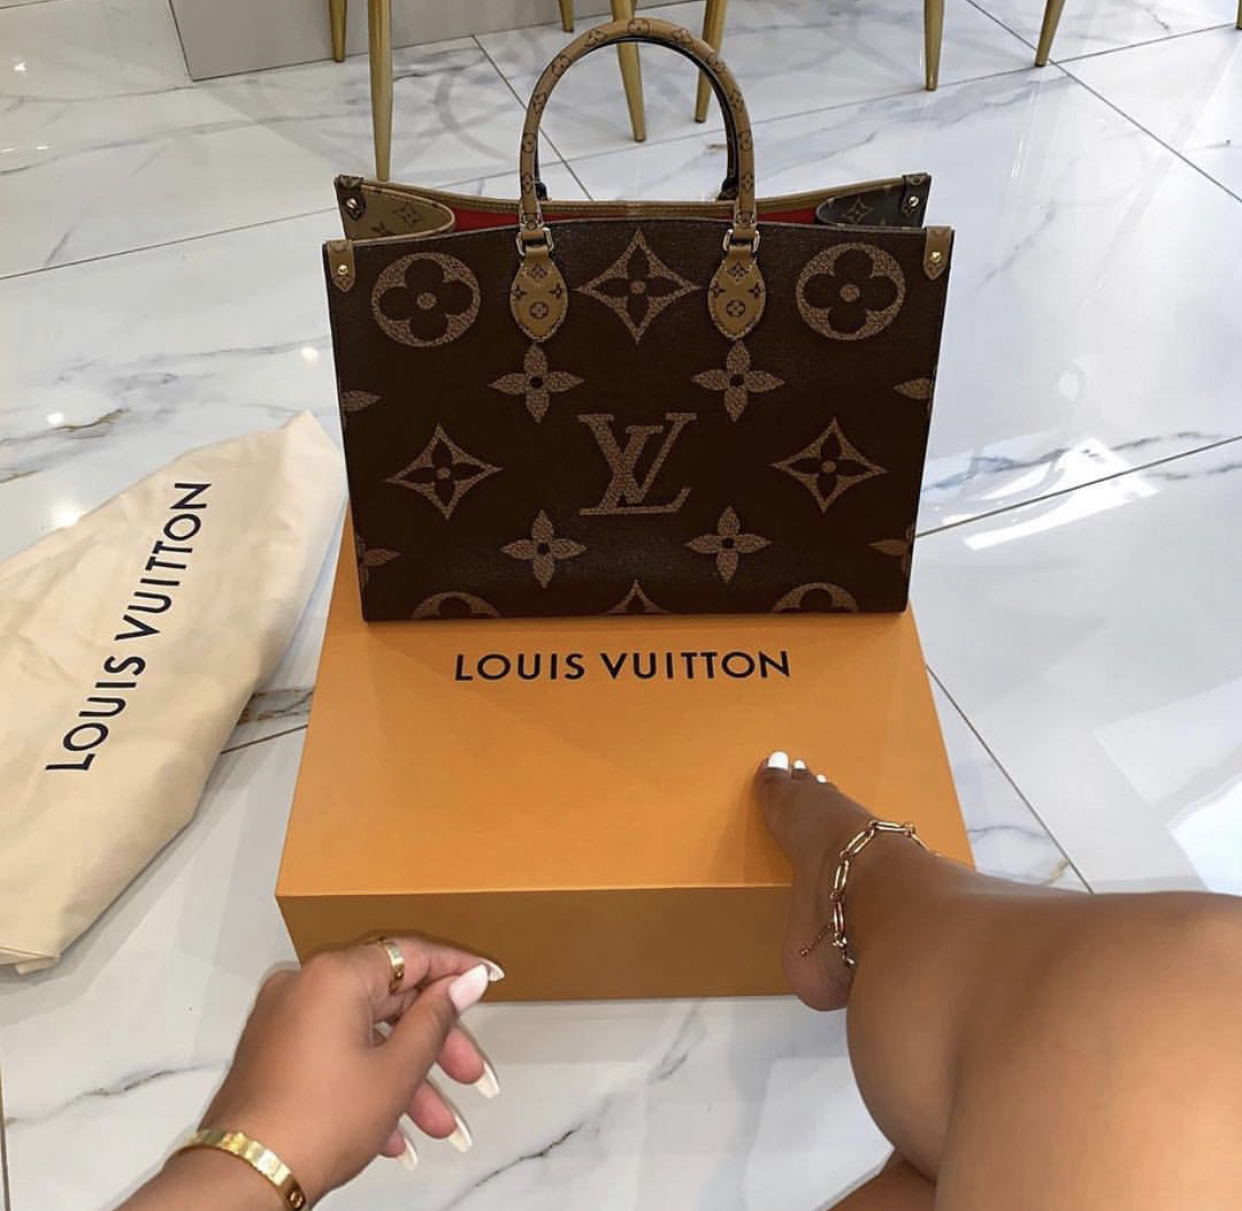 Louis Vuitton Prices In Europe